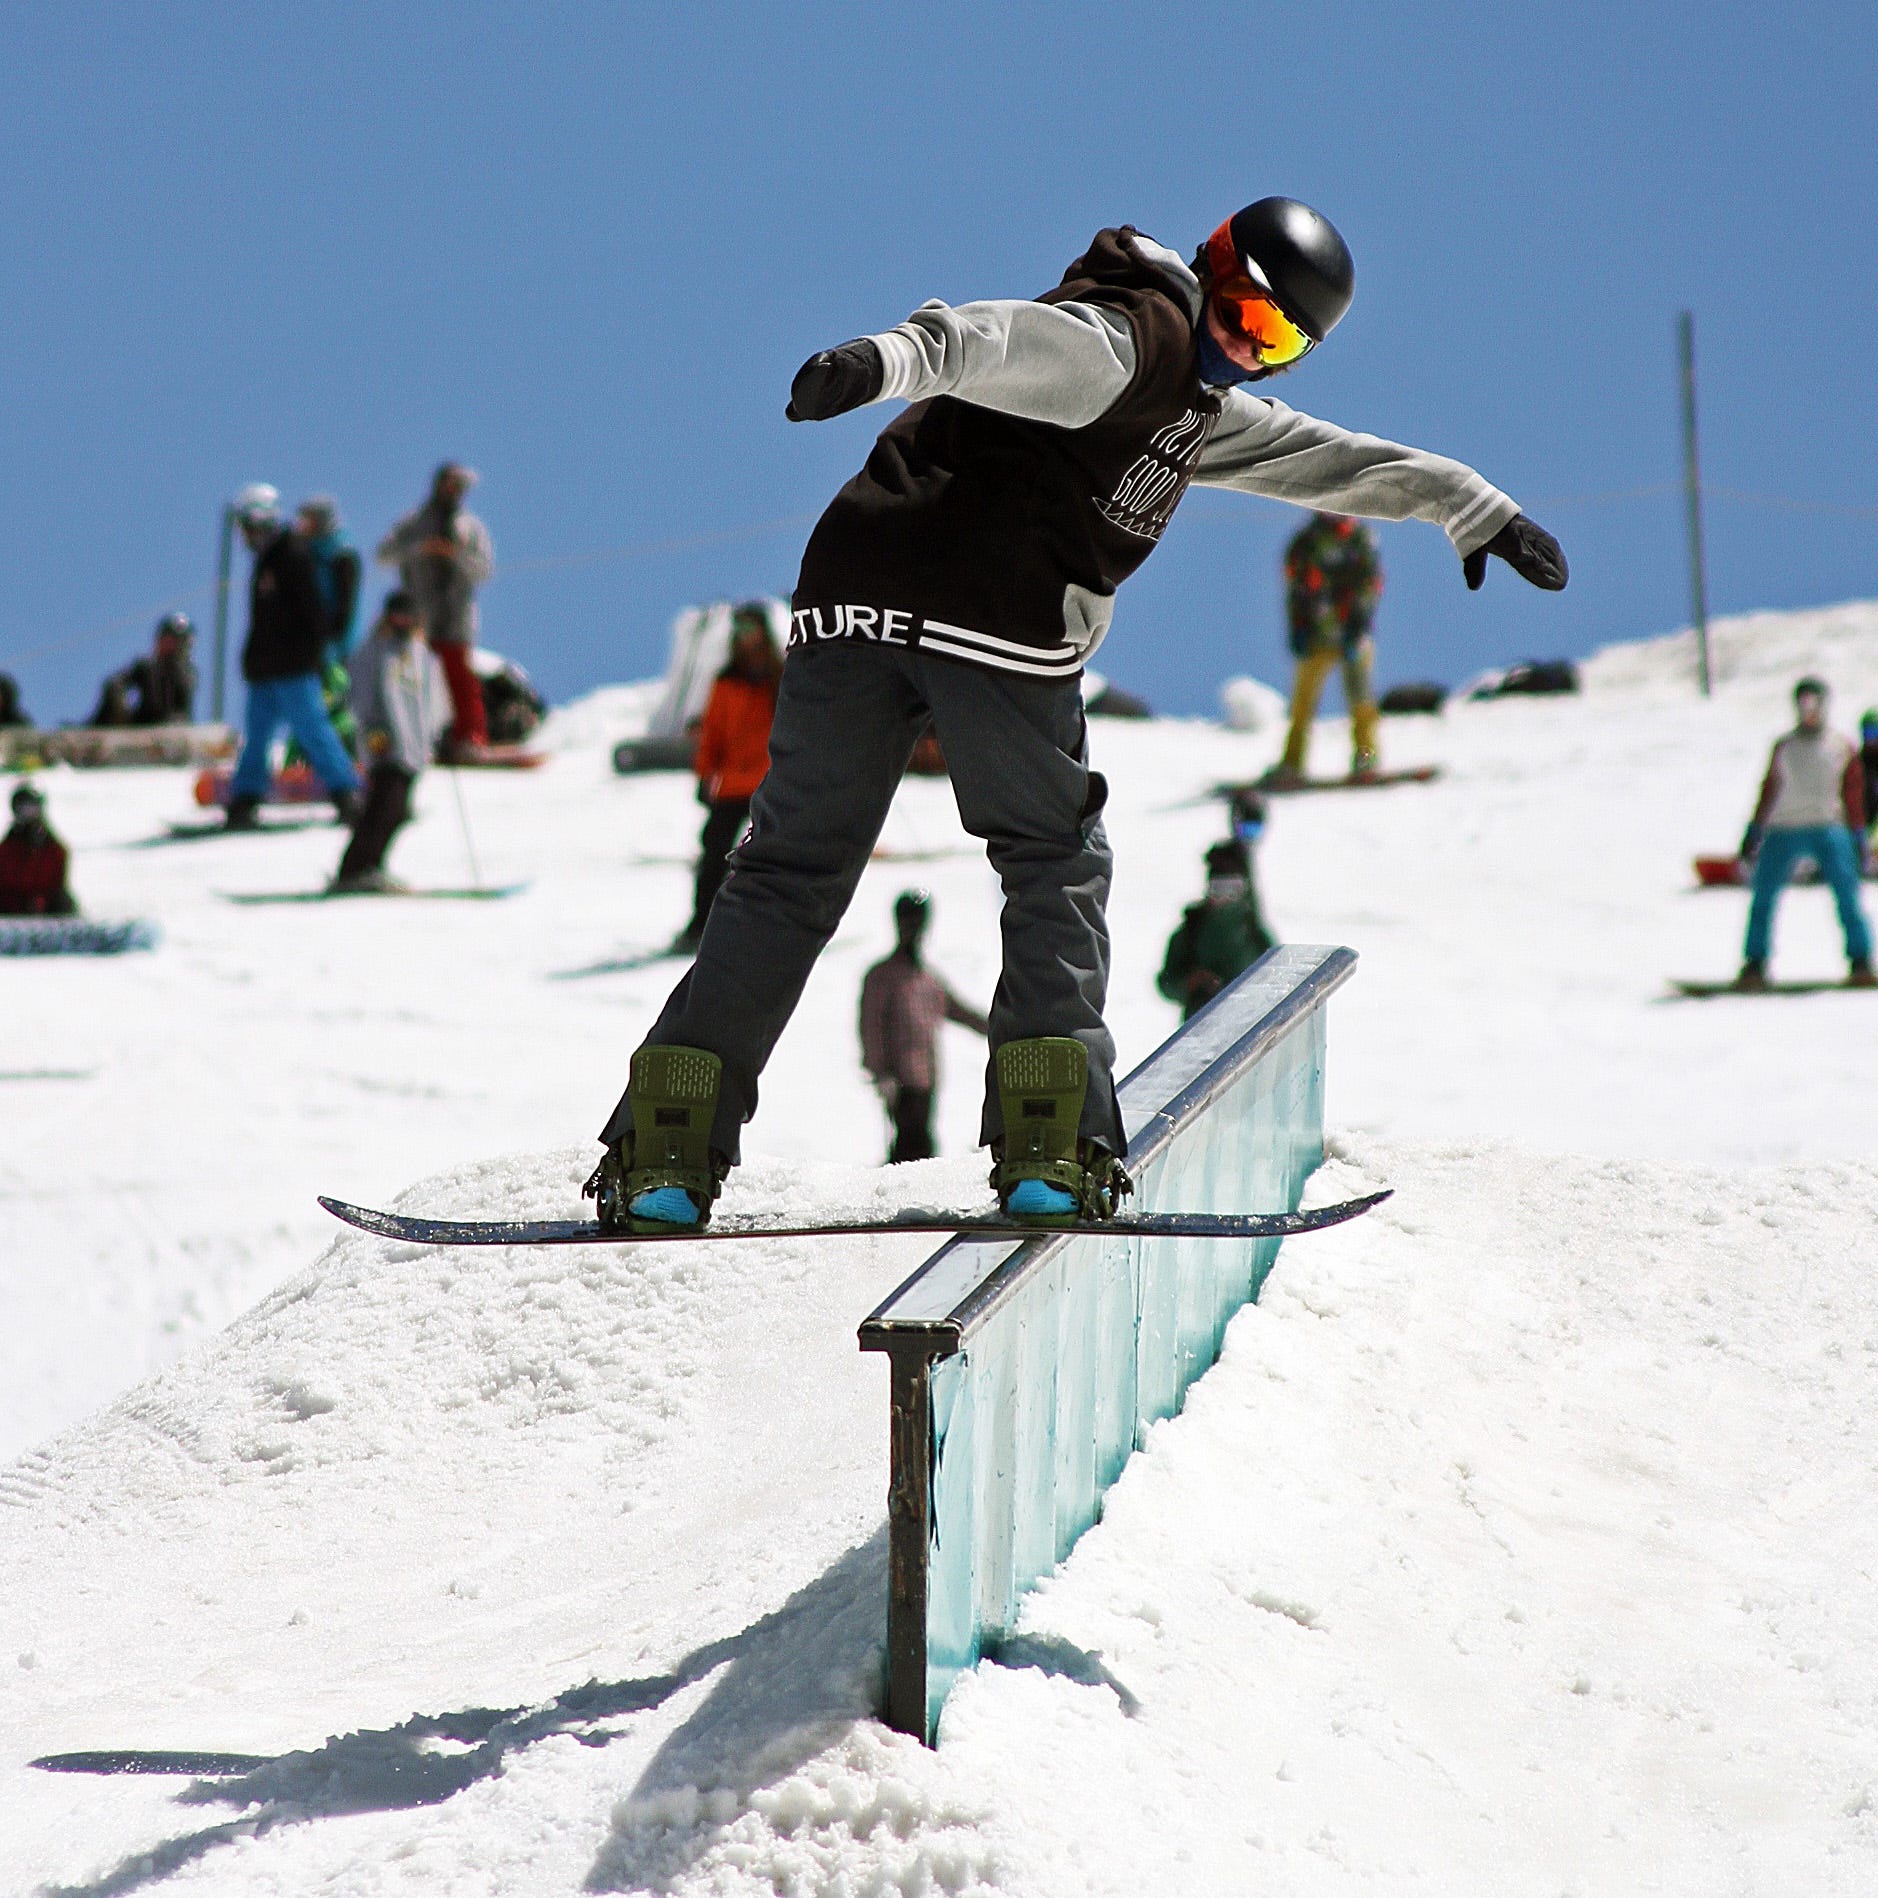 The keys to dialling a Frontside Boardslide on a snowboard | by James  Streater | Medium